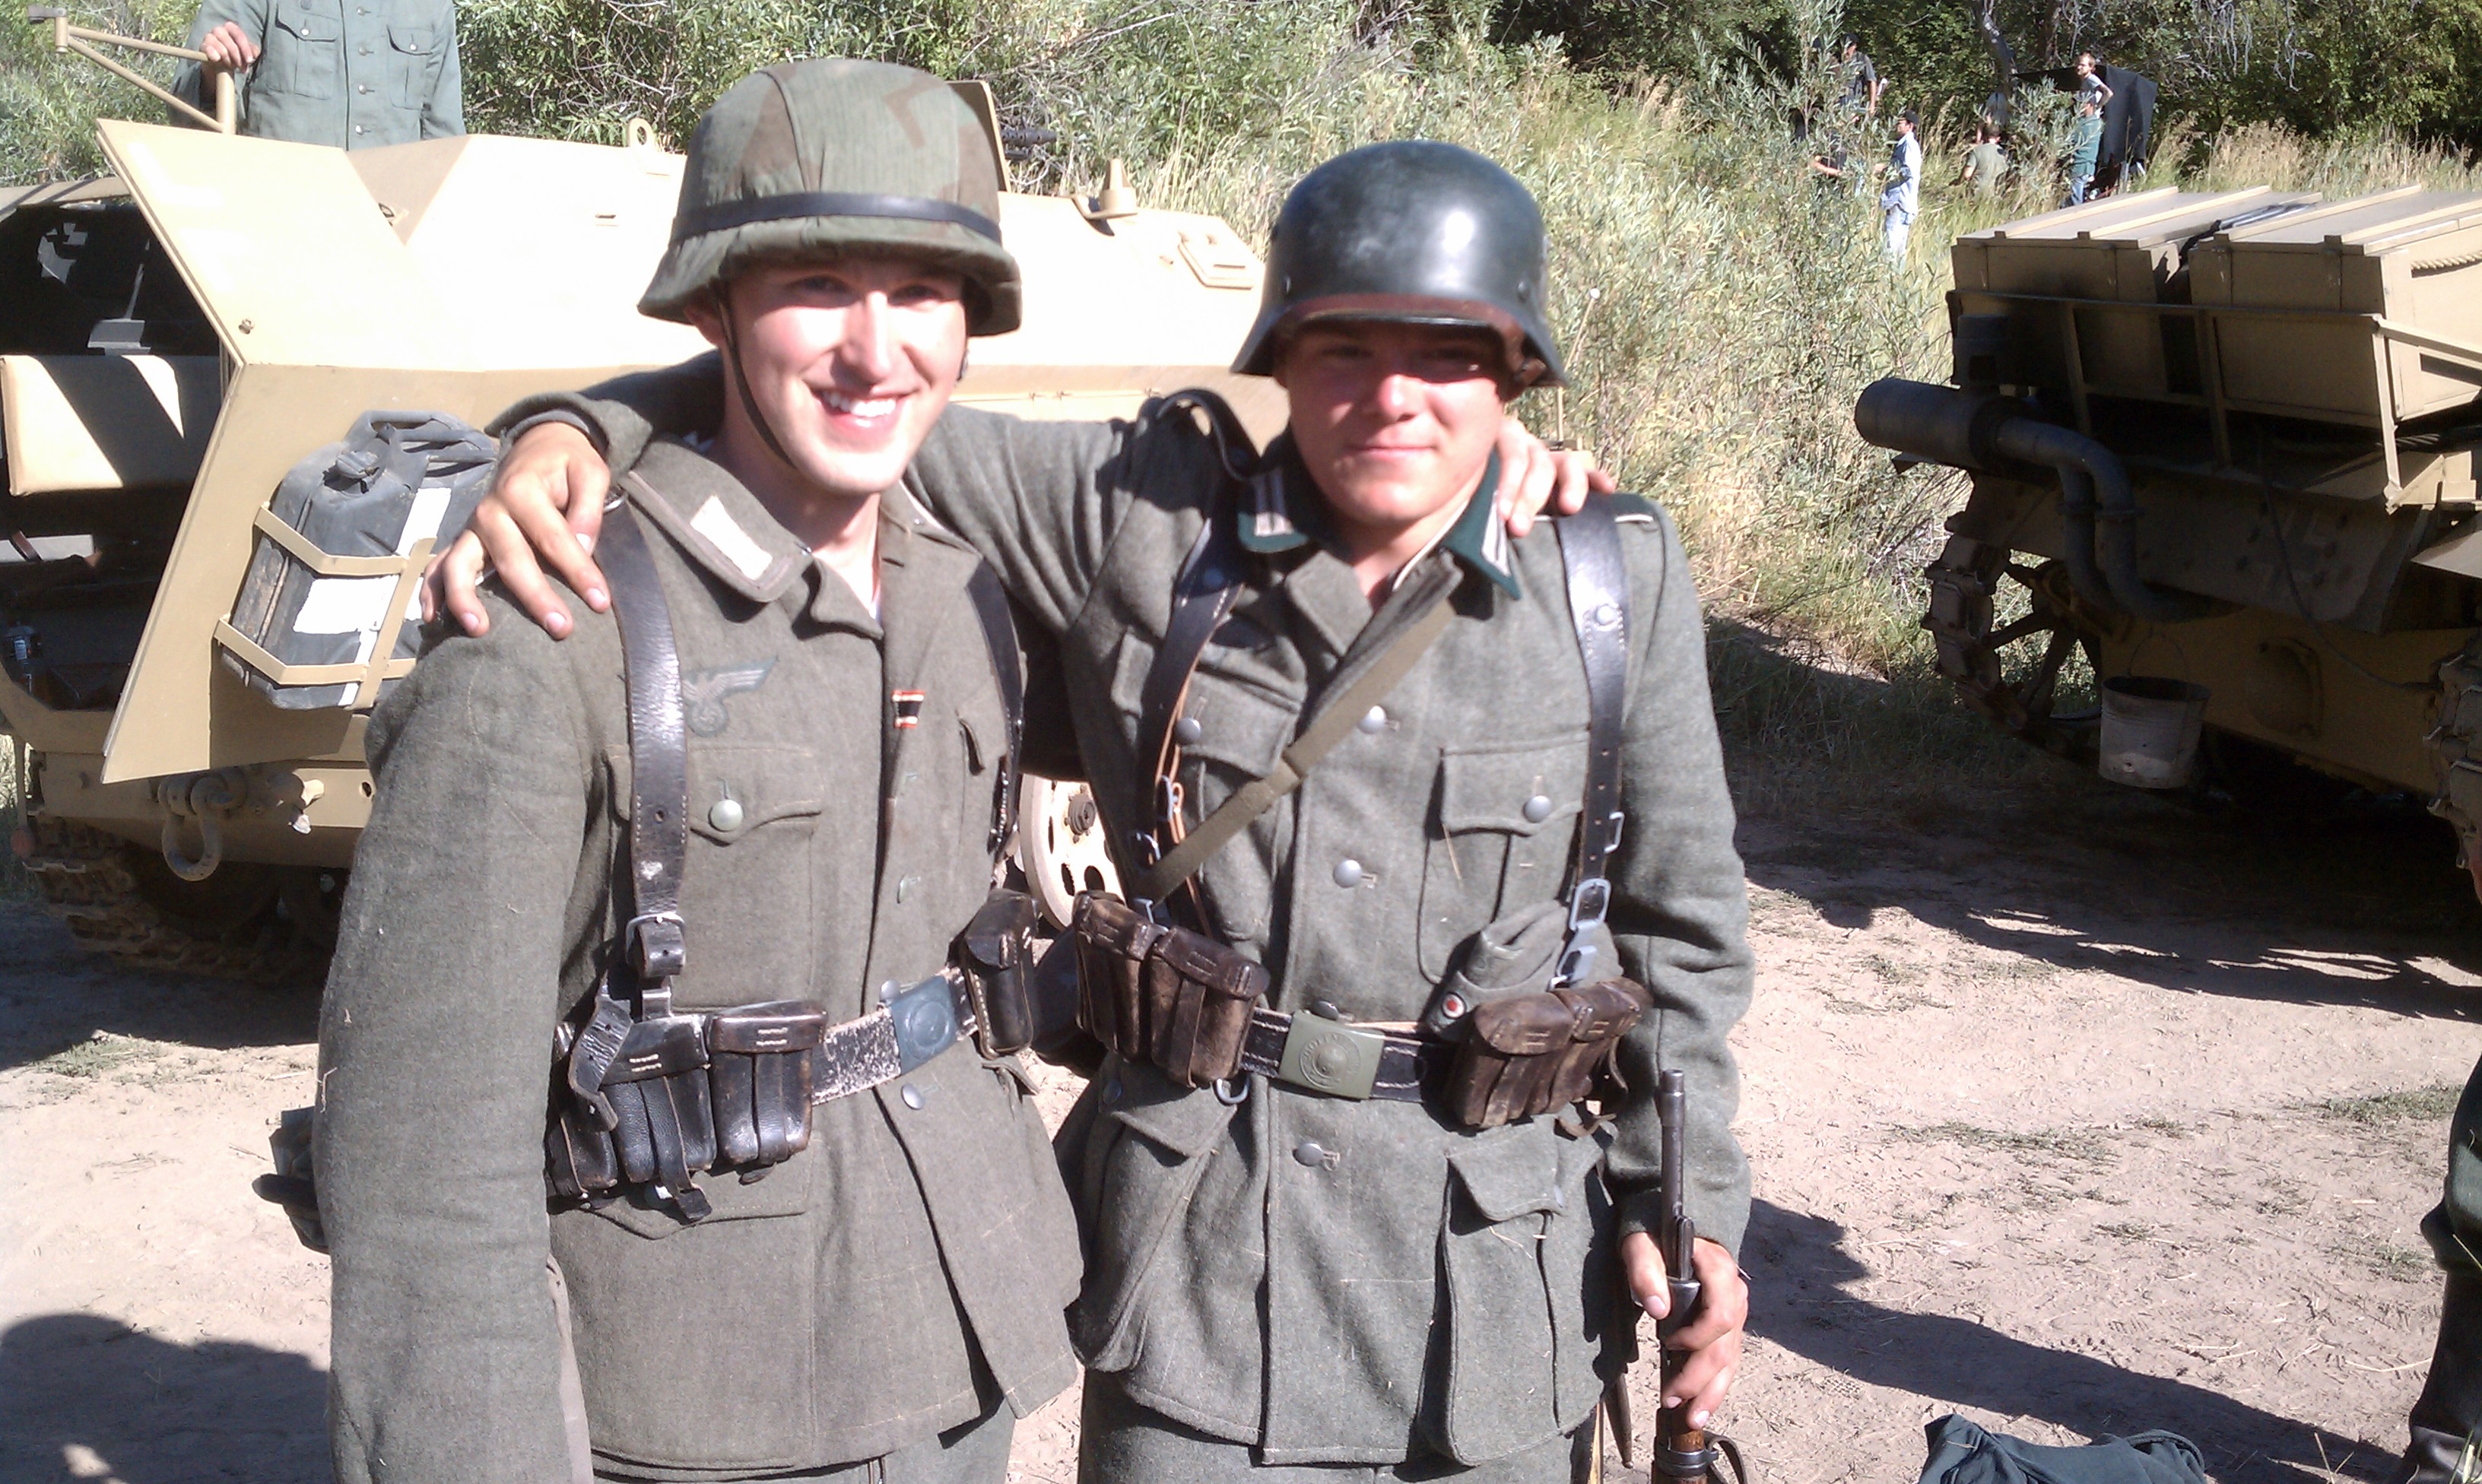 Brenden with one of the WWII re-enactors on the set of Foxhole.